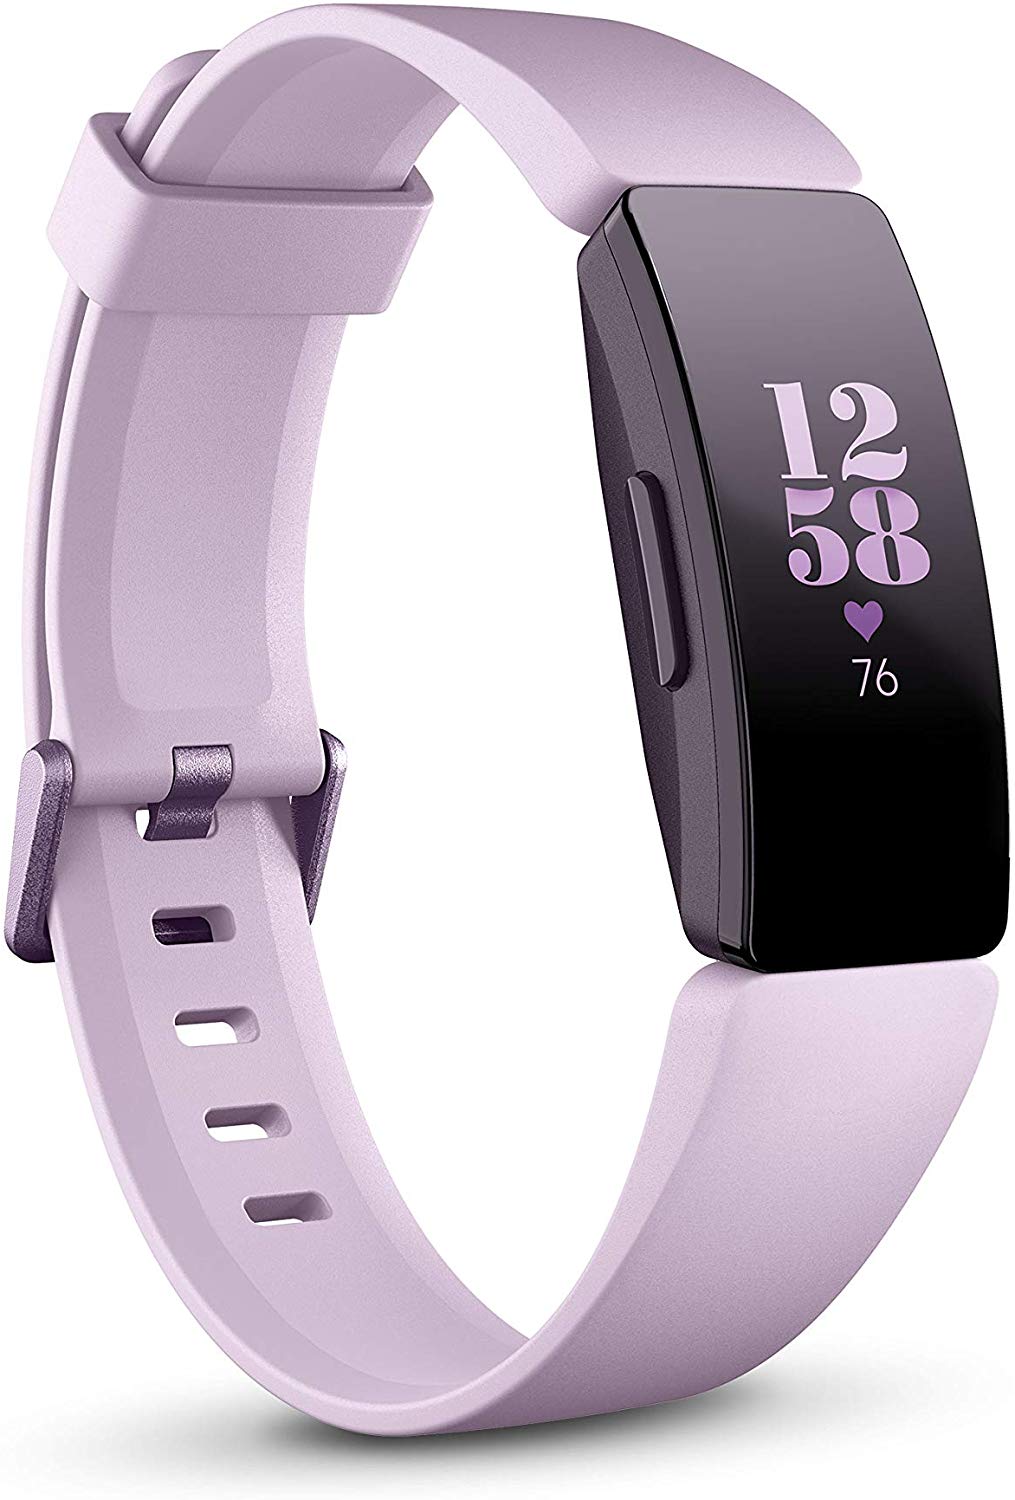 best cheapest fitbit